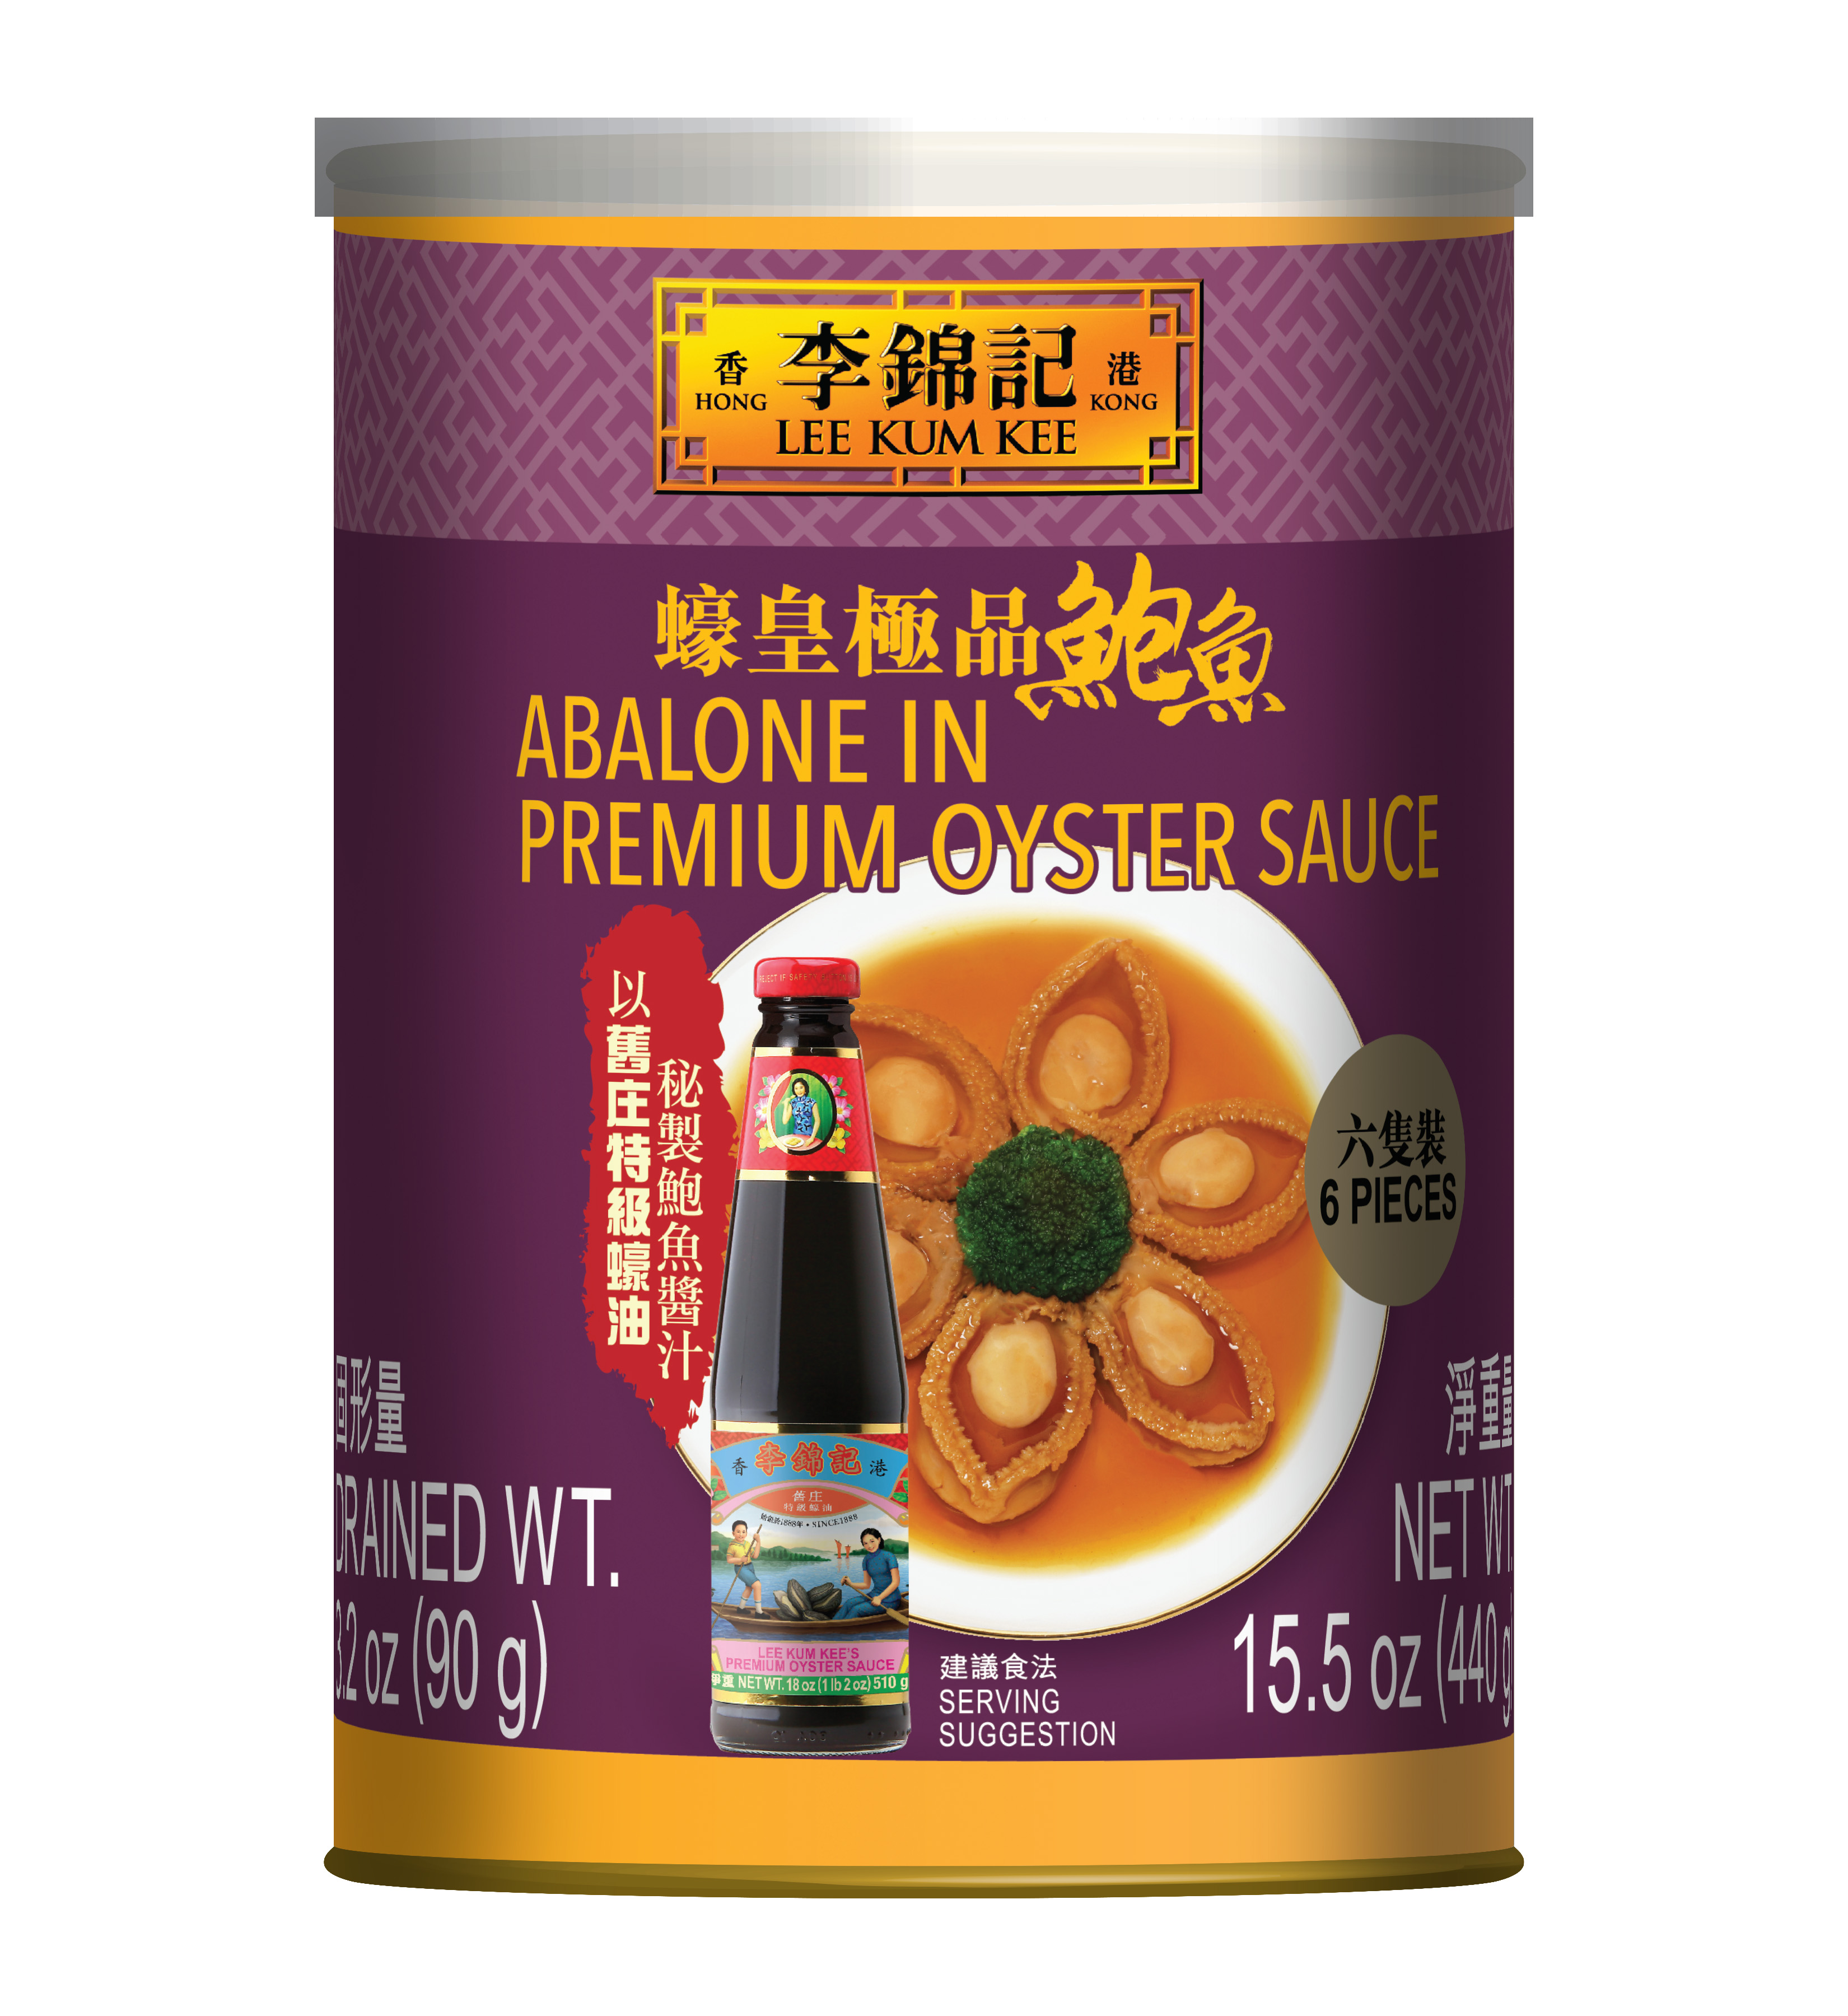 Abalone in Premium Oyster Sauce 15.5 oz (440g)